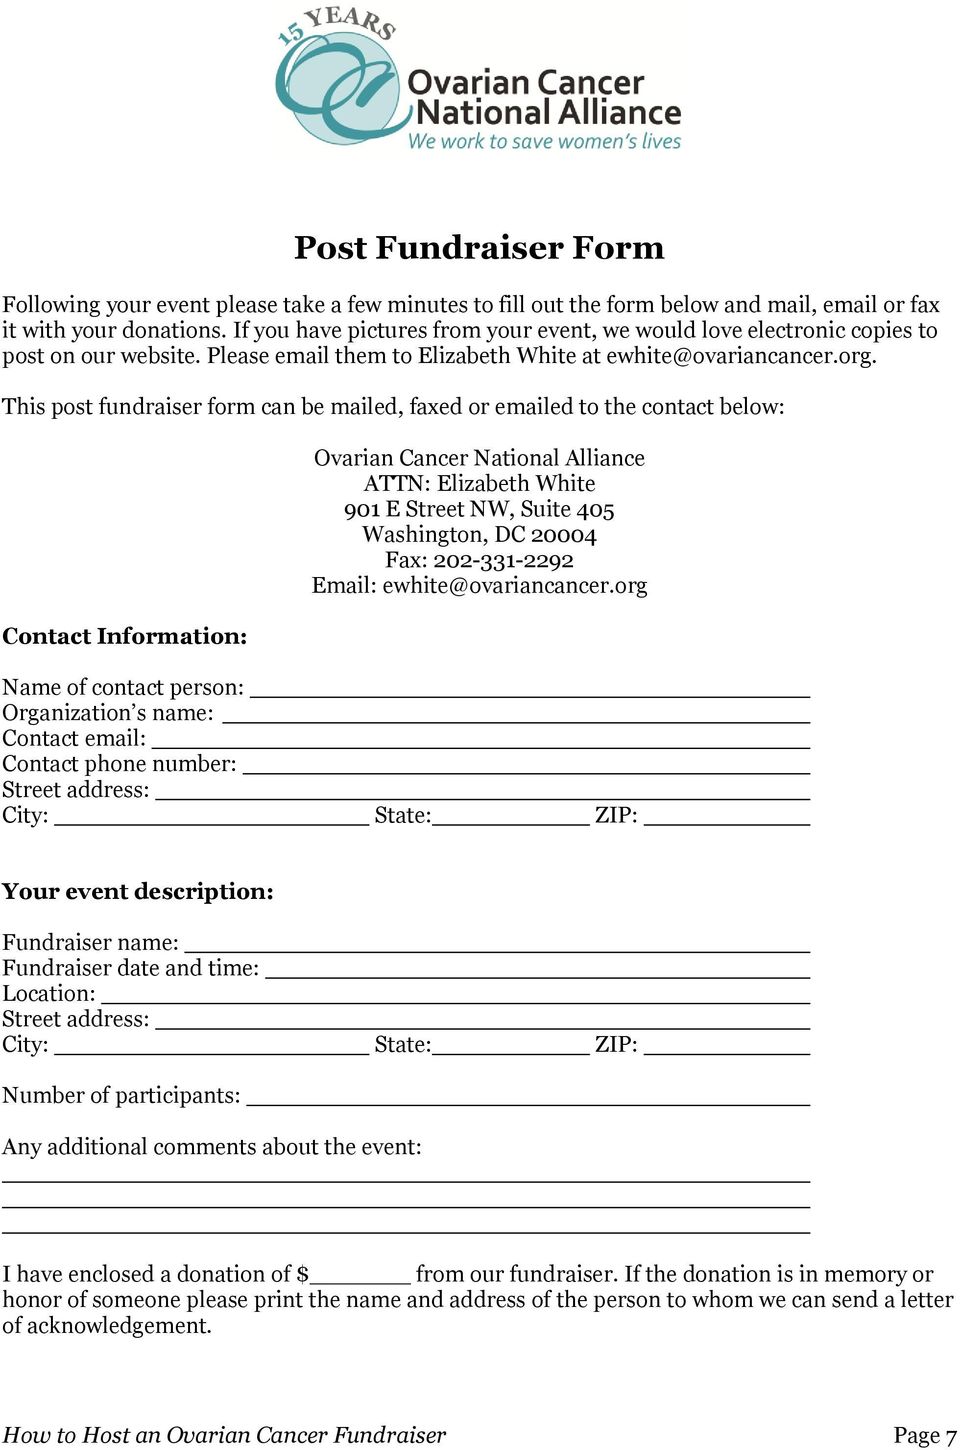 This post fundraiser form can be mailed, faxed or emailed to the contact below: Contact Information: Ovarian Cancer National Alliance ATTN: Elizabeth White 901 E Street NW, Suite 405 Washington, DC